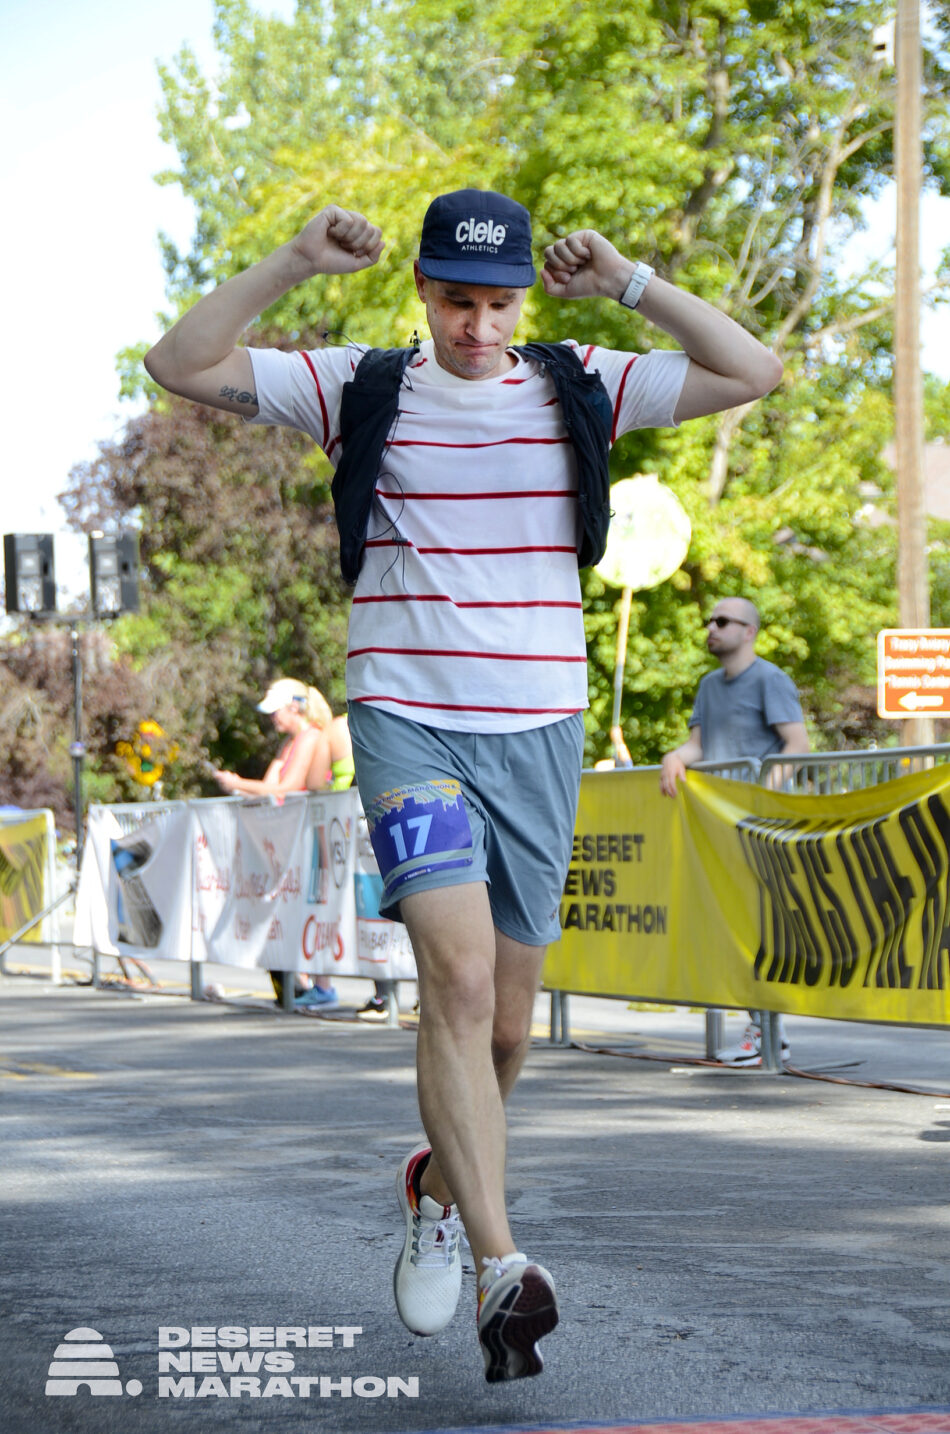 A photo of Devon Akmon crossing the finish line at Liberty Park in downtown Salt Lake City.